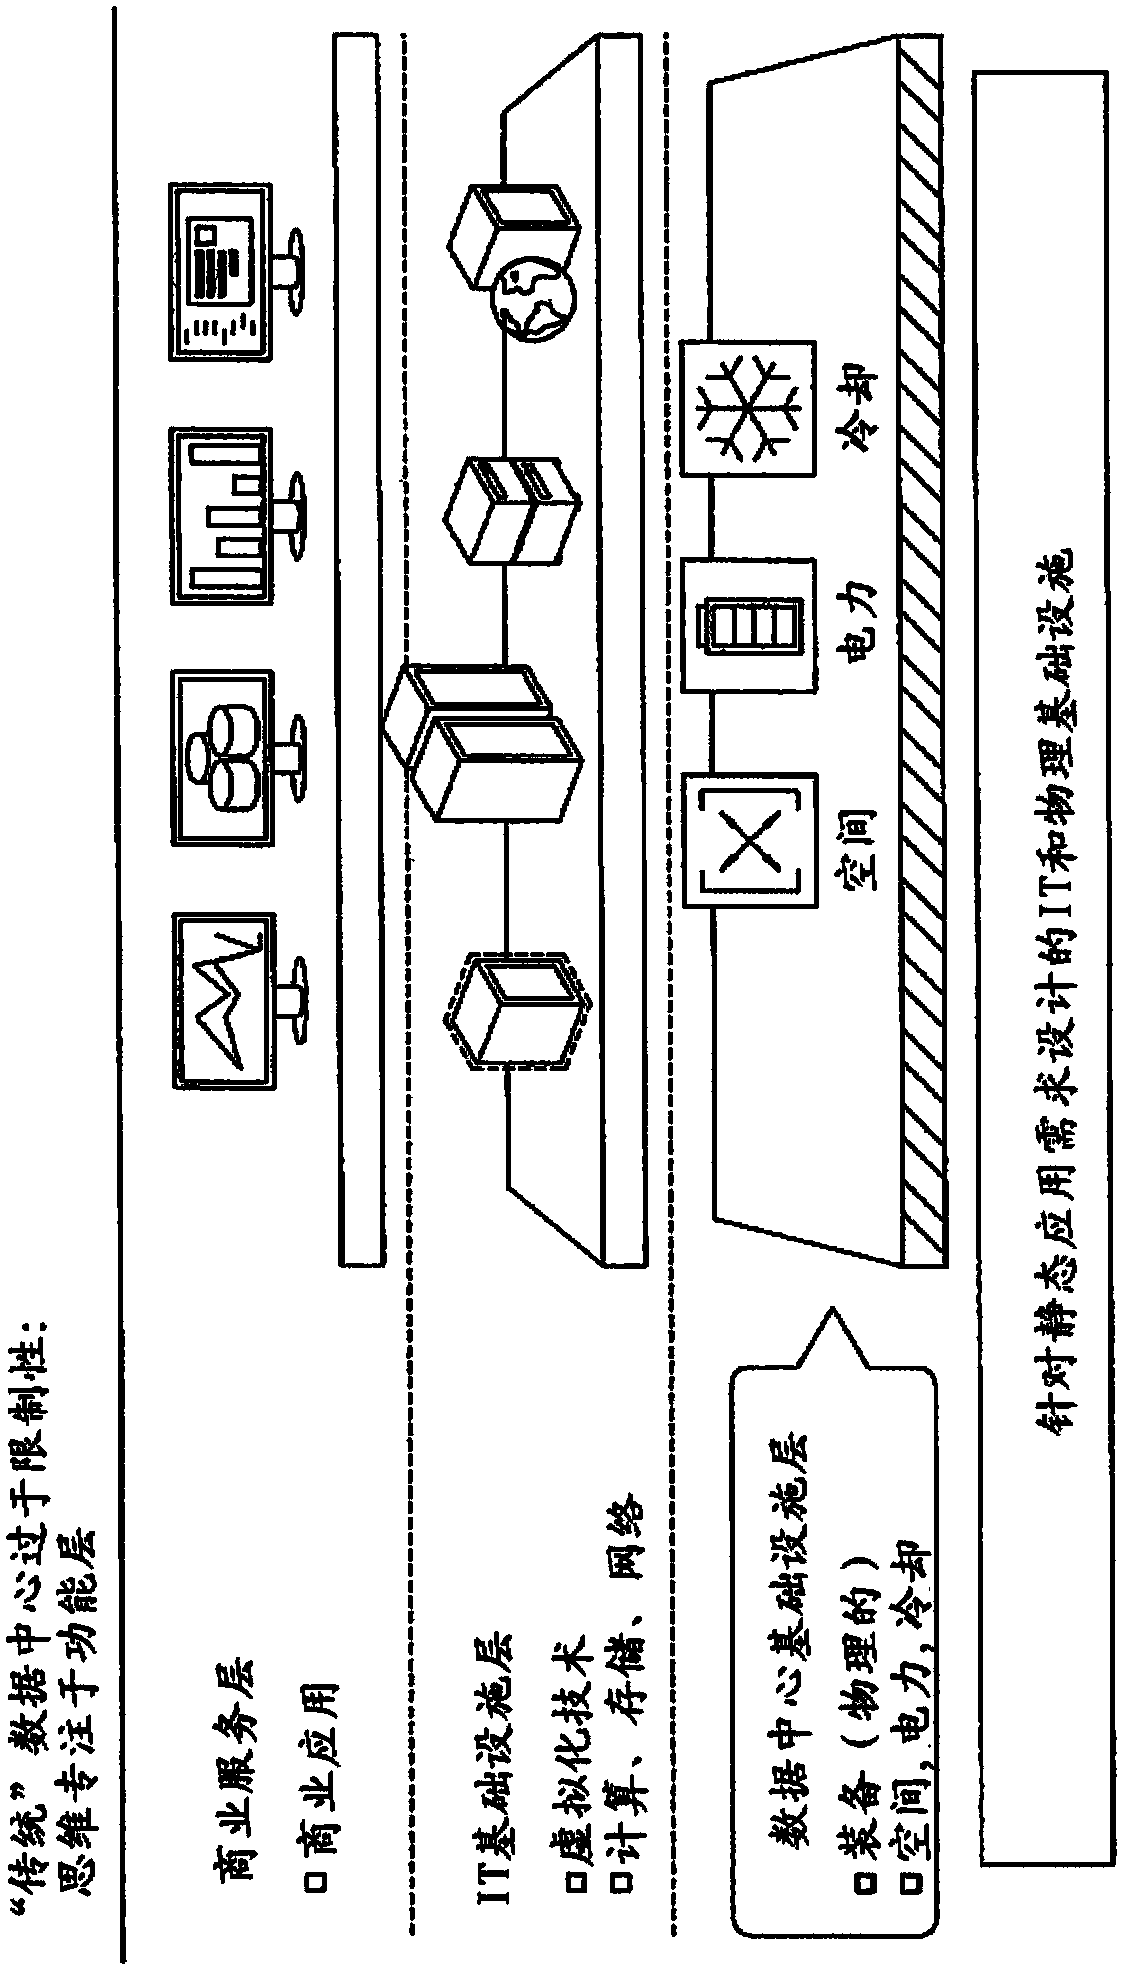 Infrastructure control fabric system and method